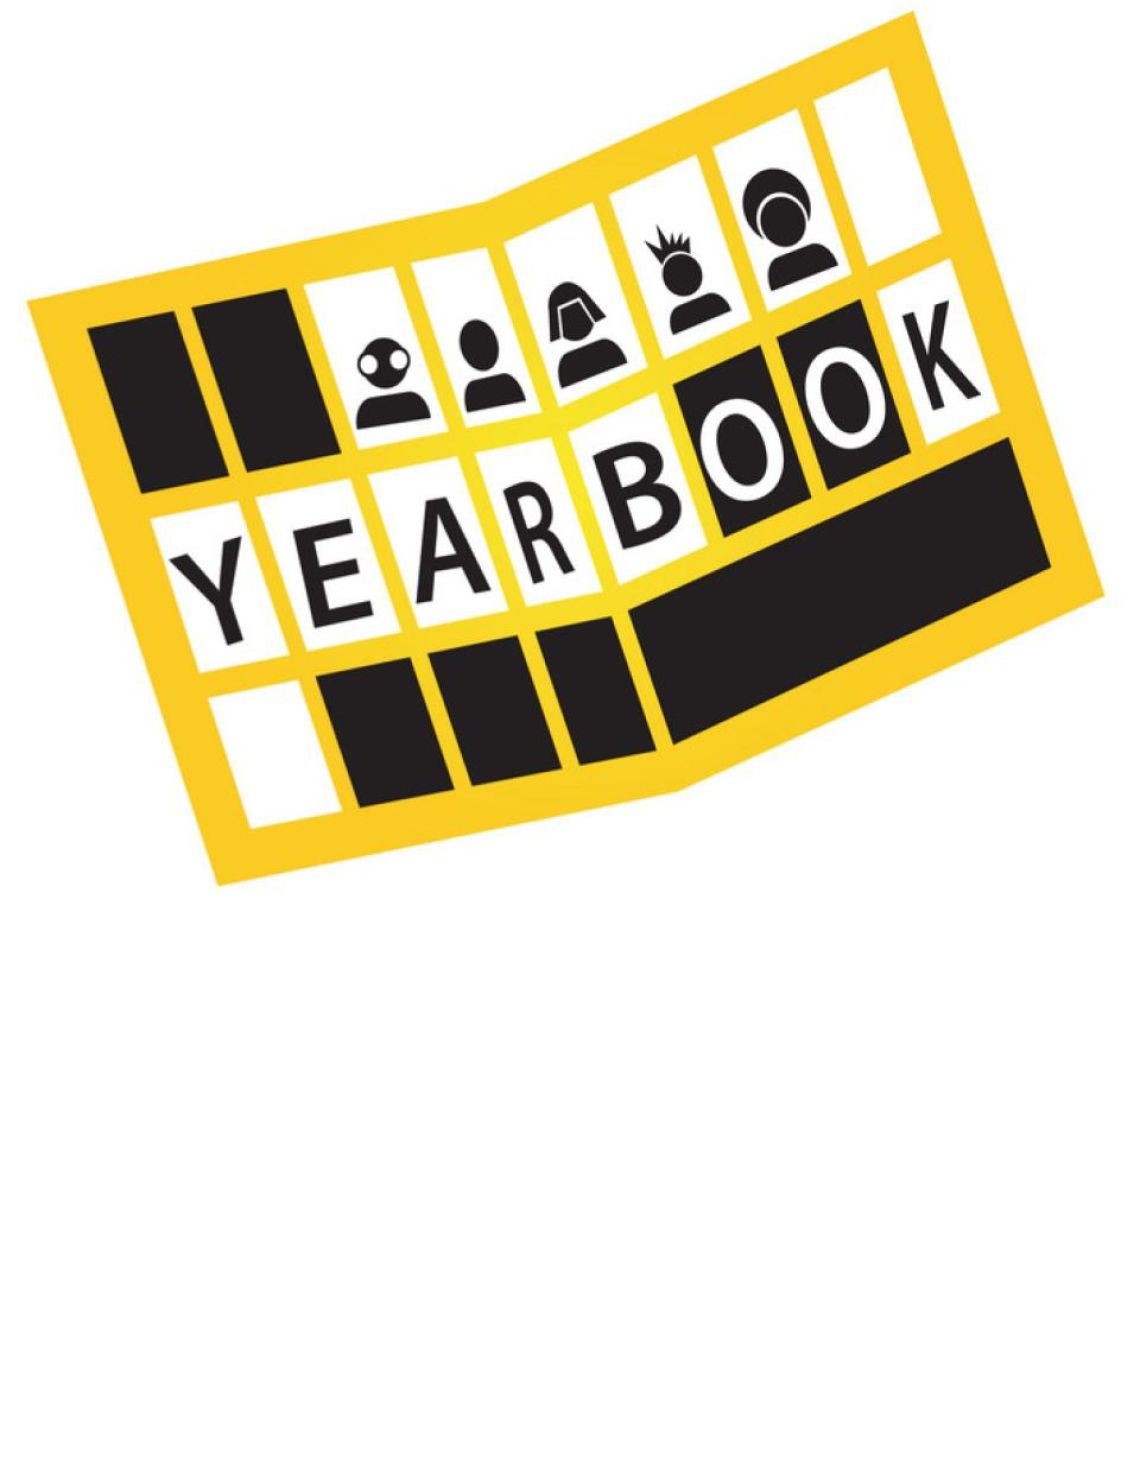 Yearbook Logo with words It's not stalking! It's called Yearbook.